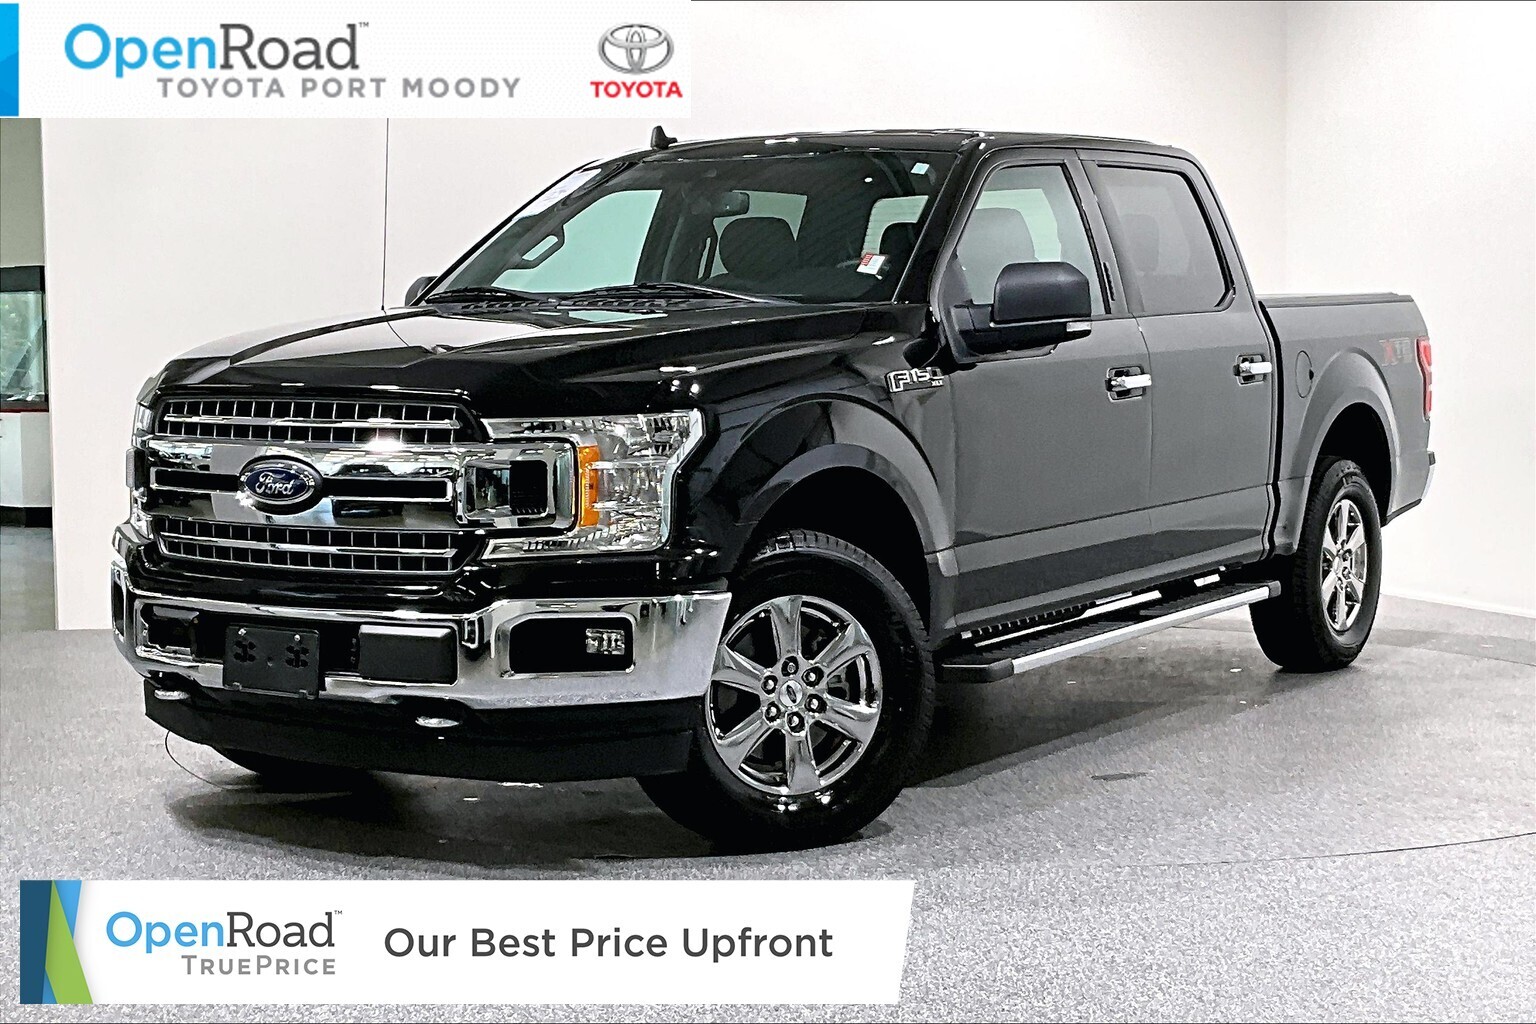 2020 Ford F-150 4x4 - Supercrew XLT - 145 WB |OpenRoad True Price 